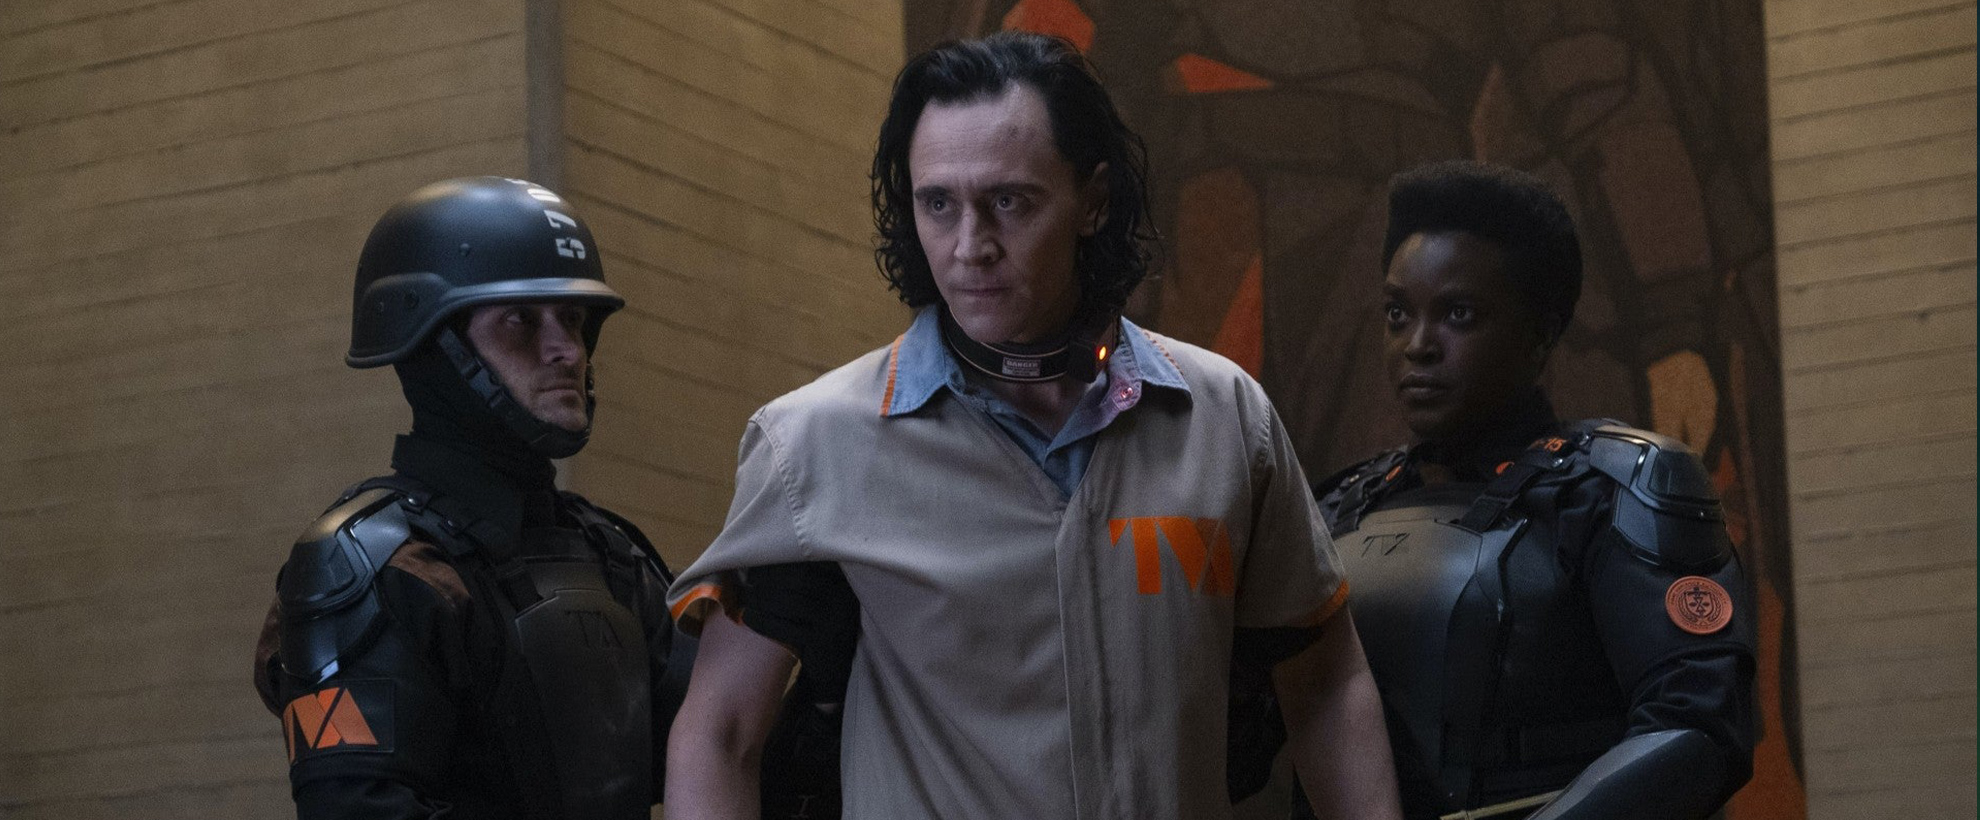 Variant Loki, being held back by two TVA employees in black uniforms